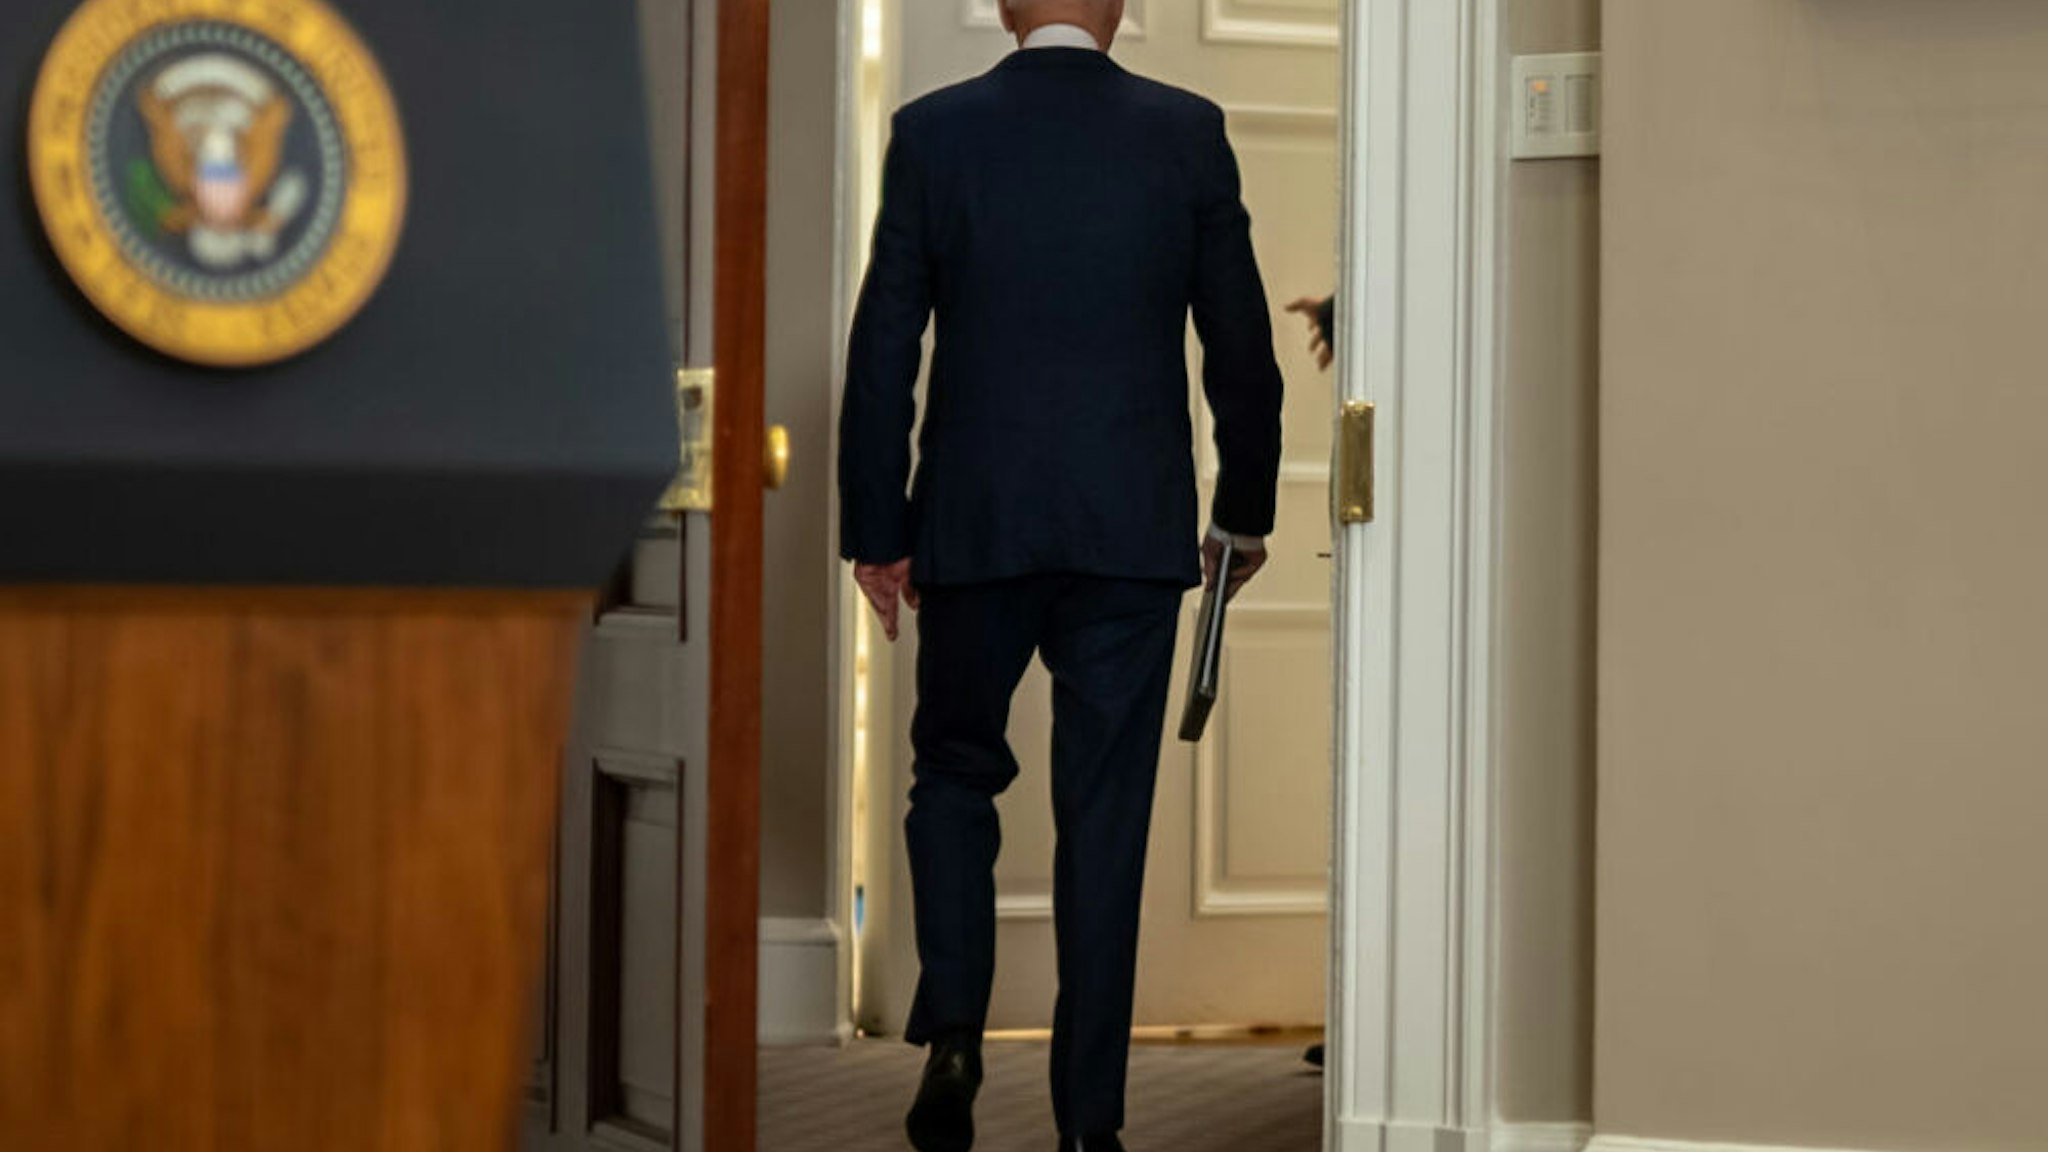 U.S. President Joe Biden departs after speaking in the Roosevelt Room of the White House in Washington, D.C., U.S., on Sunday, Aug. 22, 2021. Biden said the U.S. has expanded its evacuation efforts beyond the perimeter of the Kabul airport, warned of possible terror attacks and acknowledged that he may be forced to push back his deadline for leaving Afghanistan.